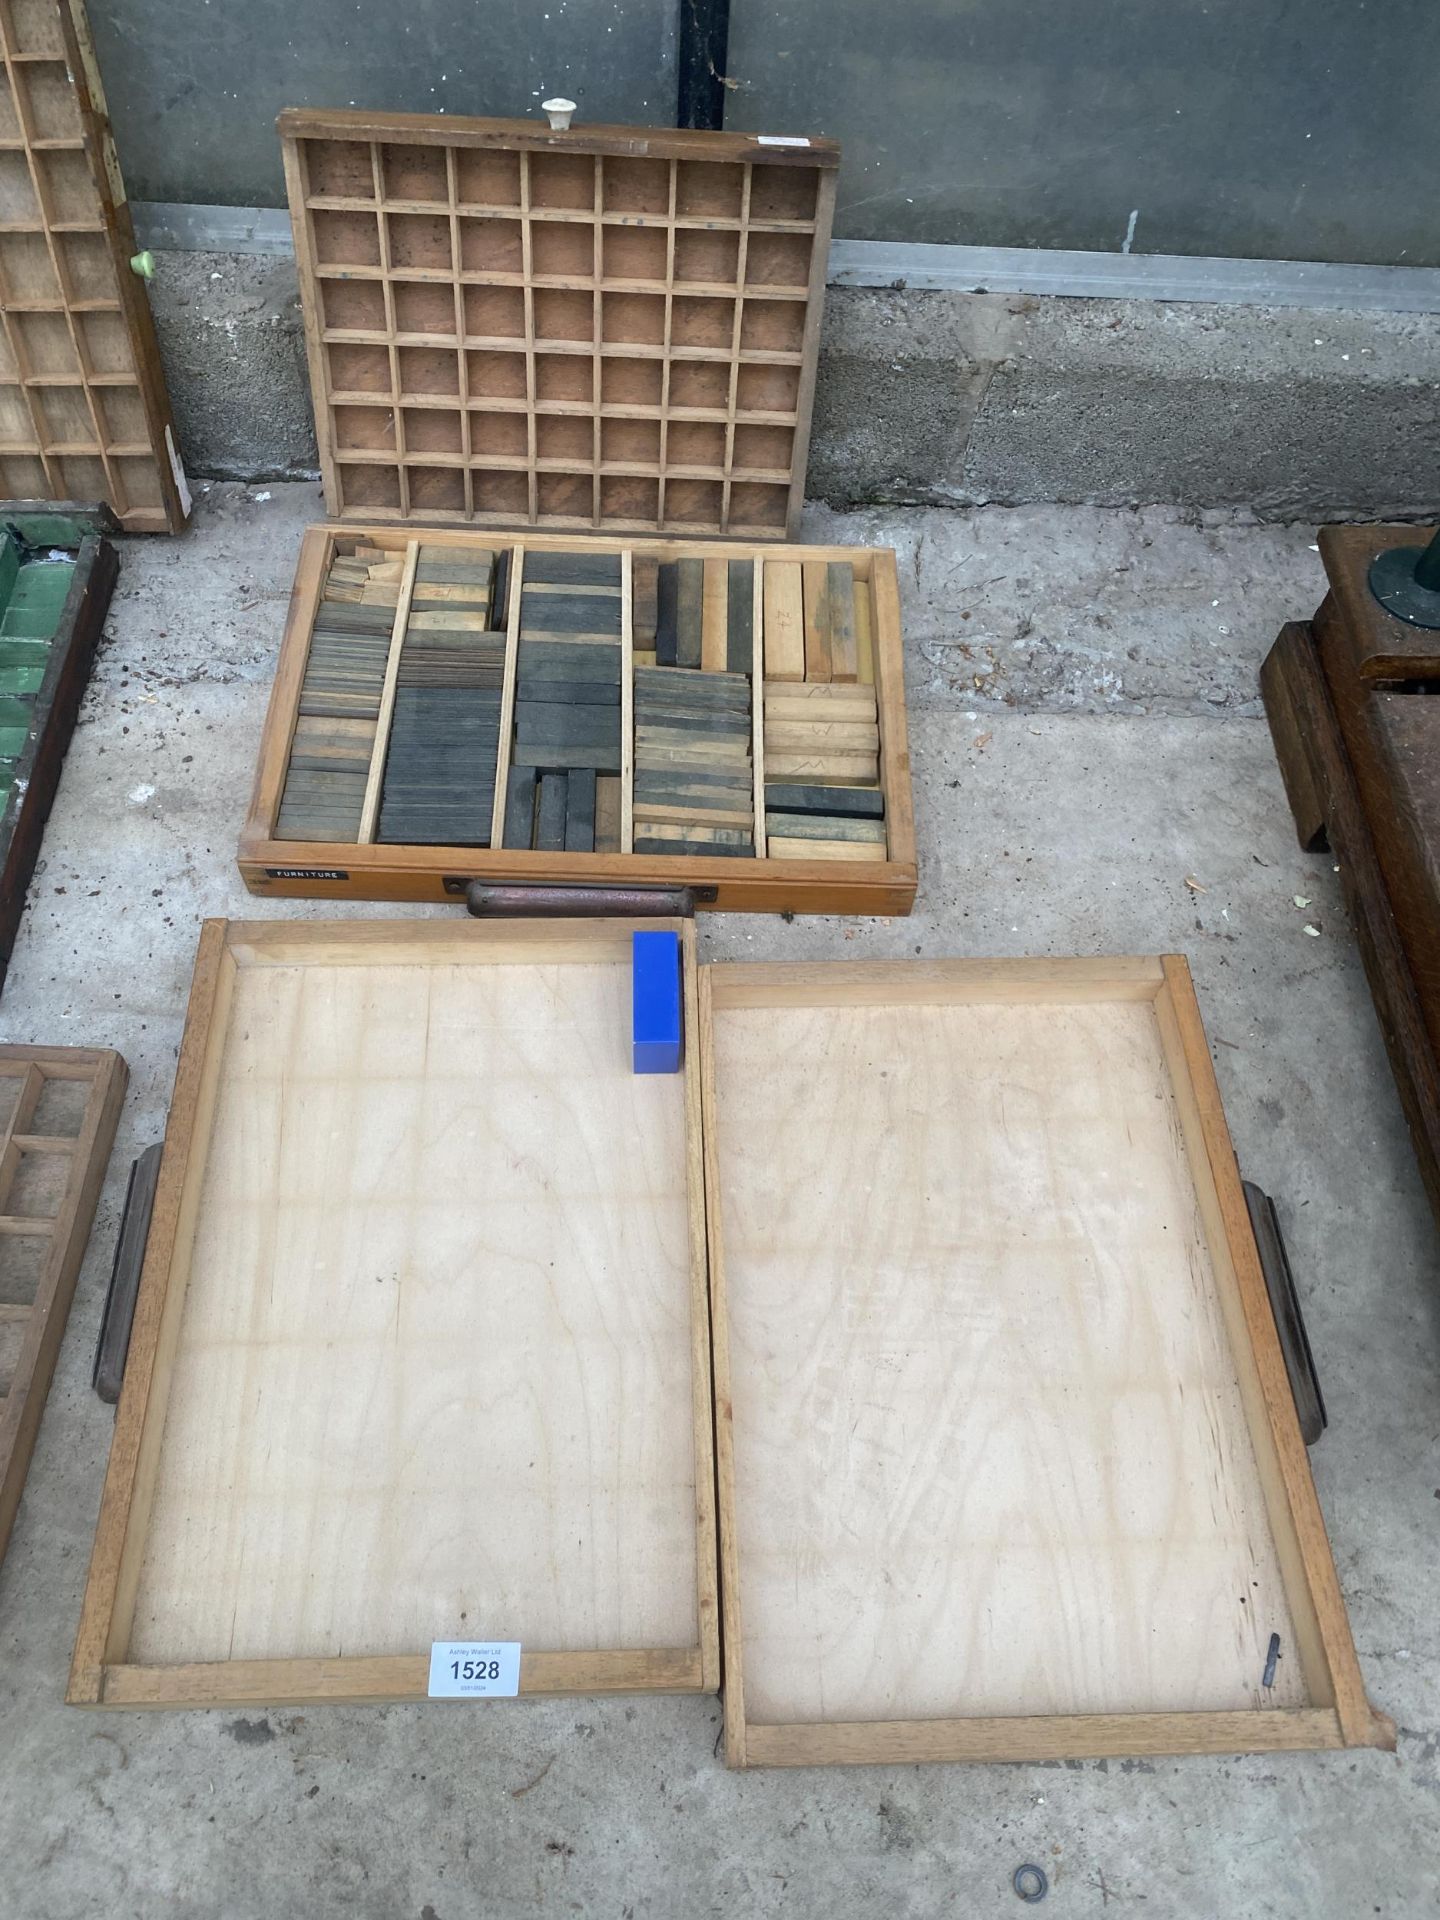 FOUR SMALL PRINTS TRAYS AND A QUANTITY OF WOODEN BLOCKS